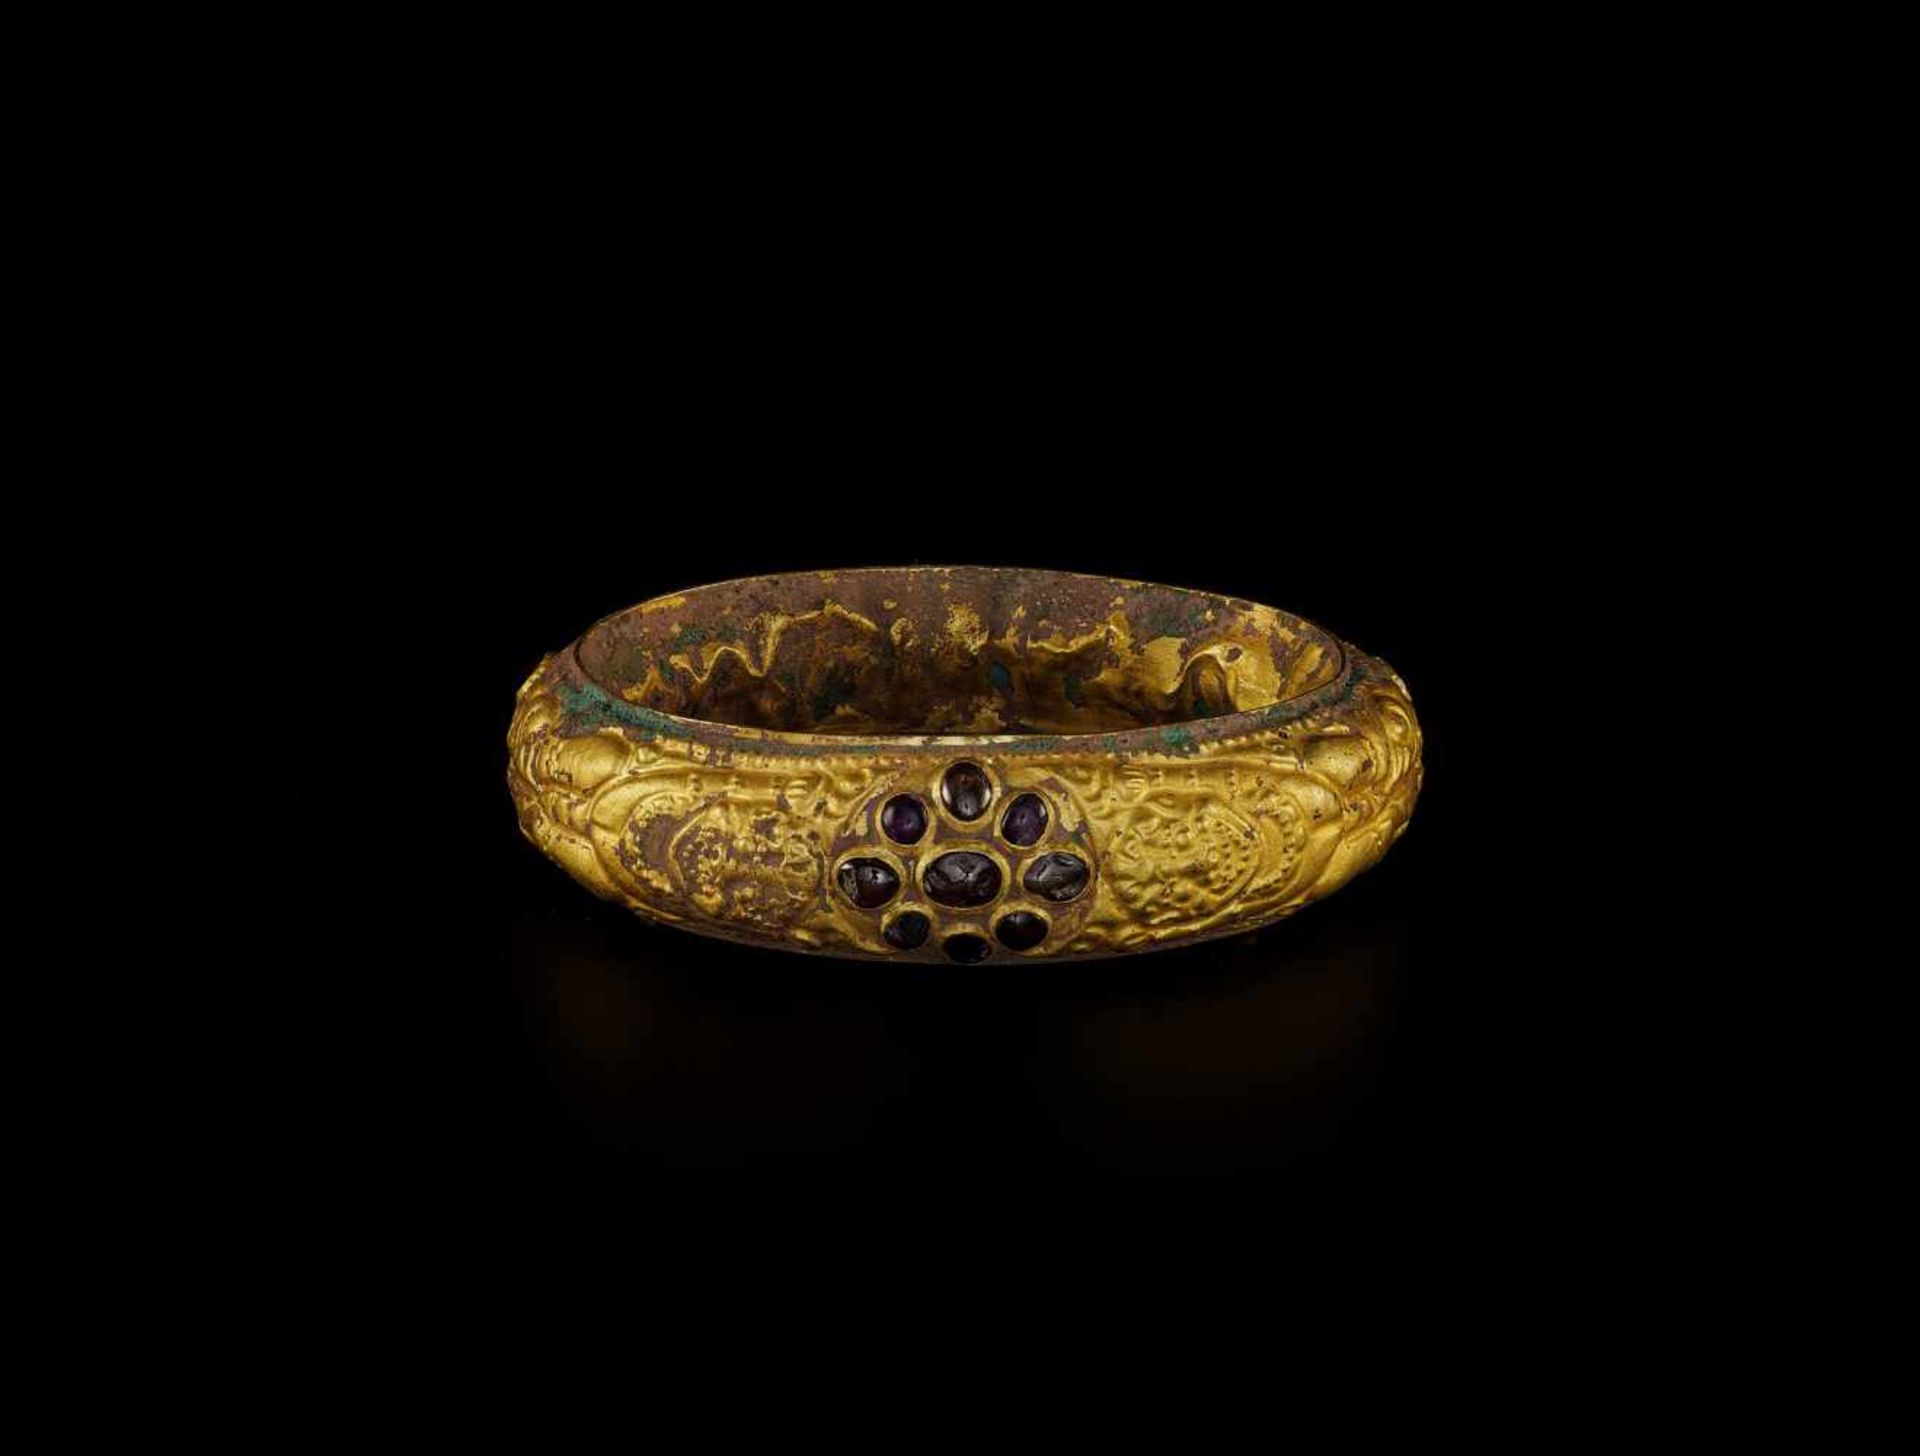 A CHAM REPOUSSÉ GOLD BRACELET WITH A GEMSTONE FLOWER AND GUARDIAN LIONS Champa, classical period,